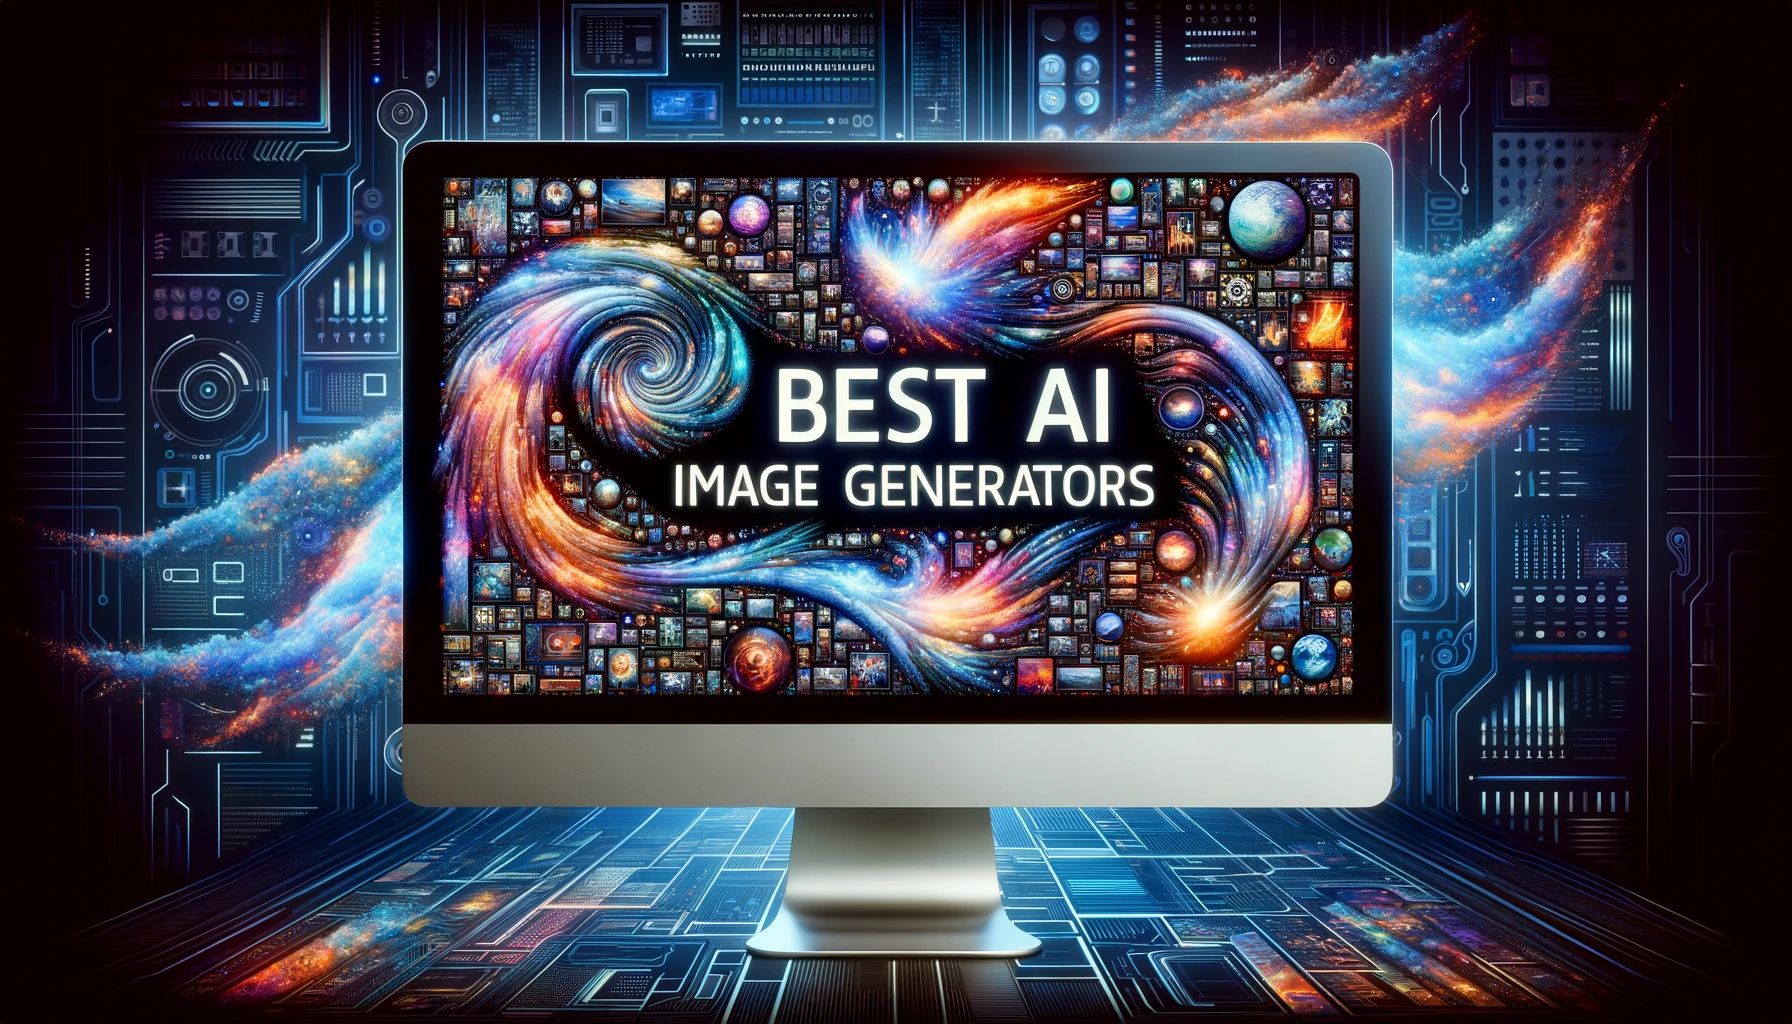 An eye-catching and futuristic computer screen displaying a variety of AI-generated images, with the text 'Best AI Image Generators' prominently featured.